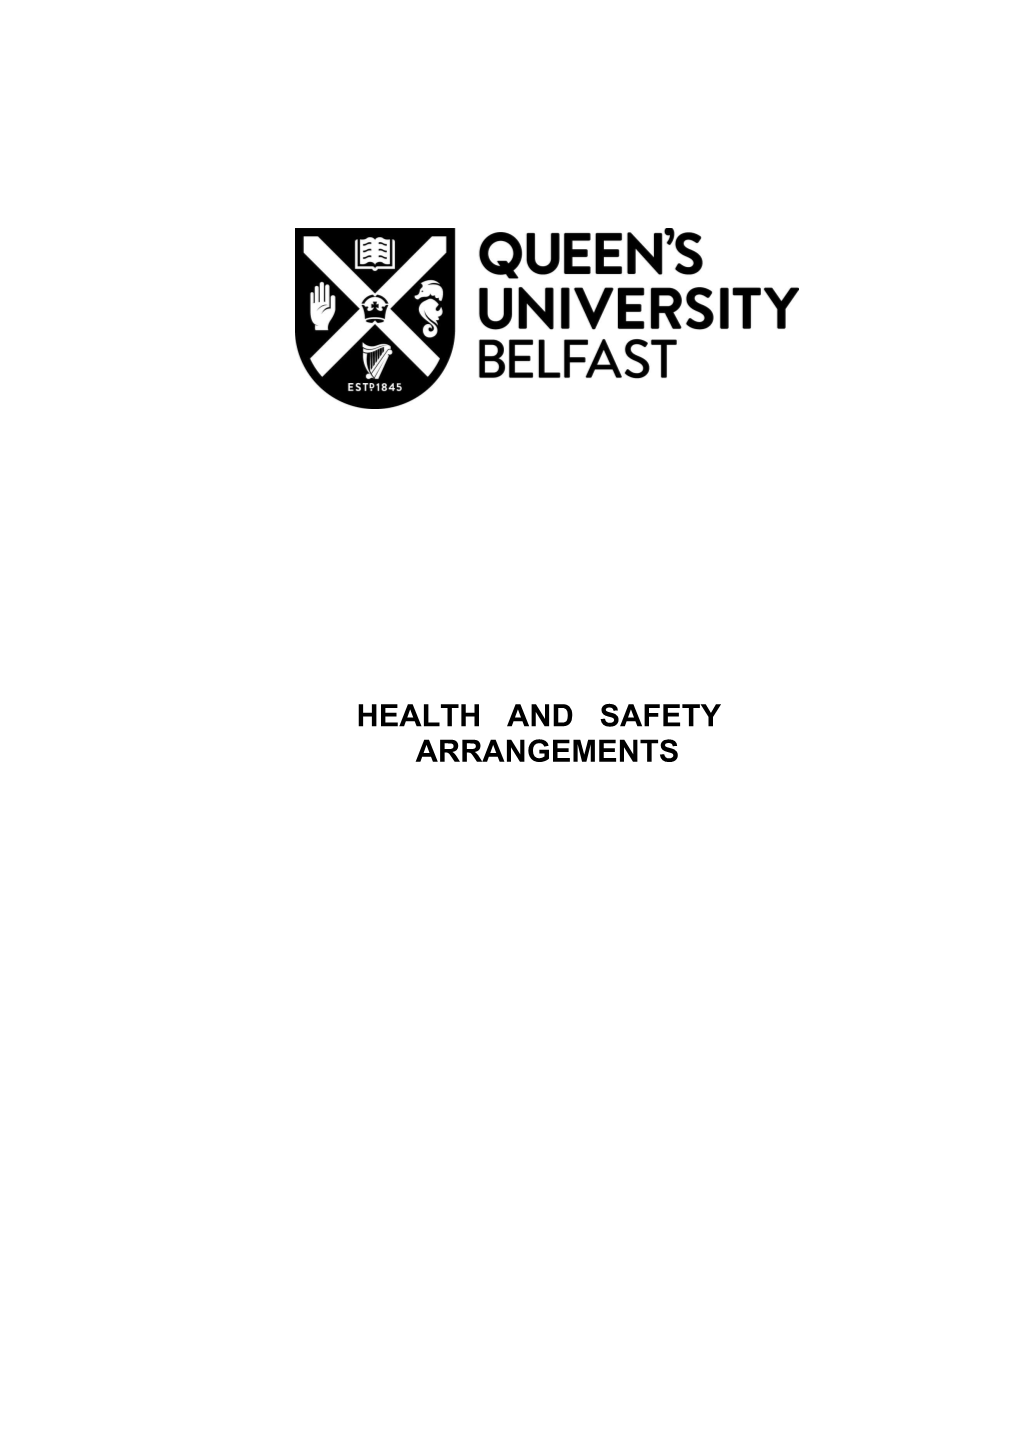 Part 2: HEALTH and SAFETY ARRANGEMENTS